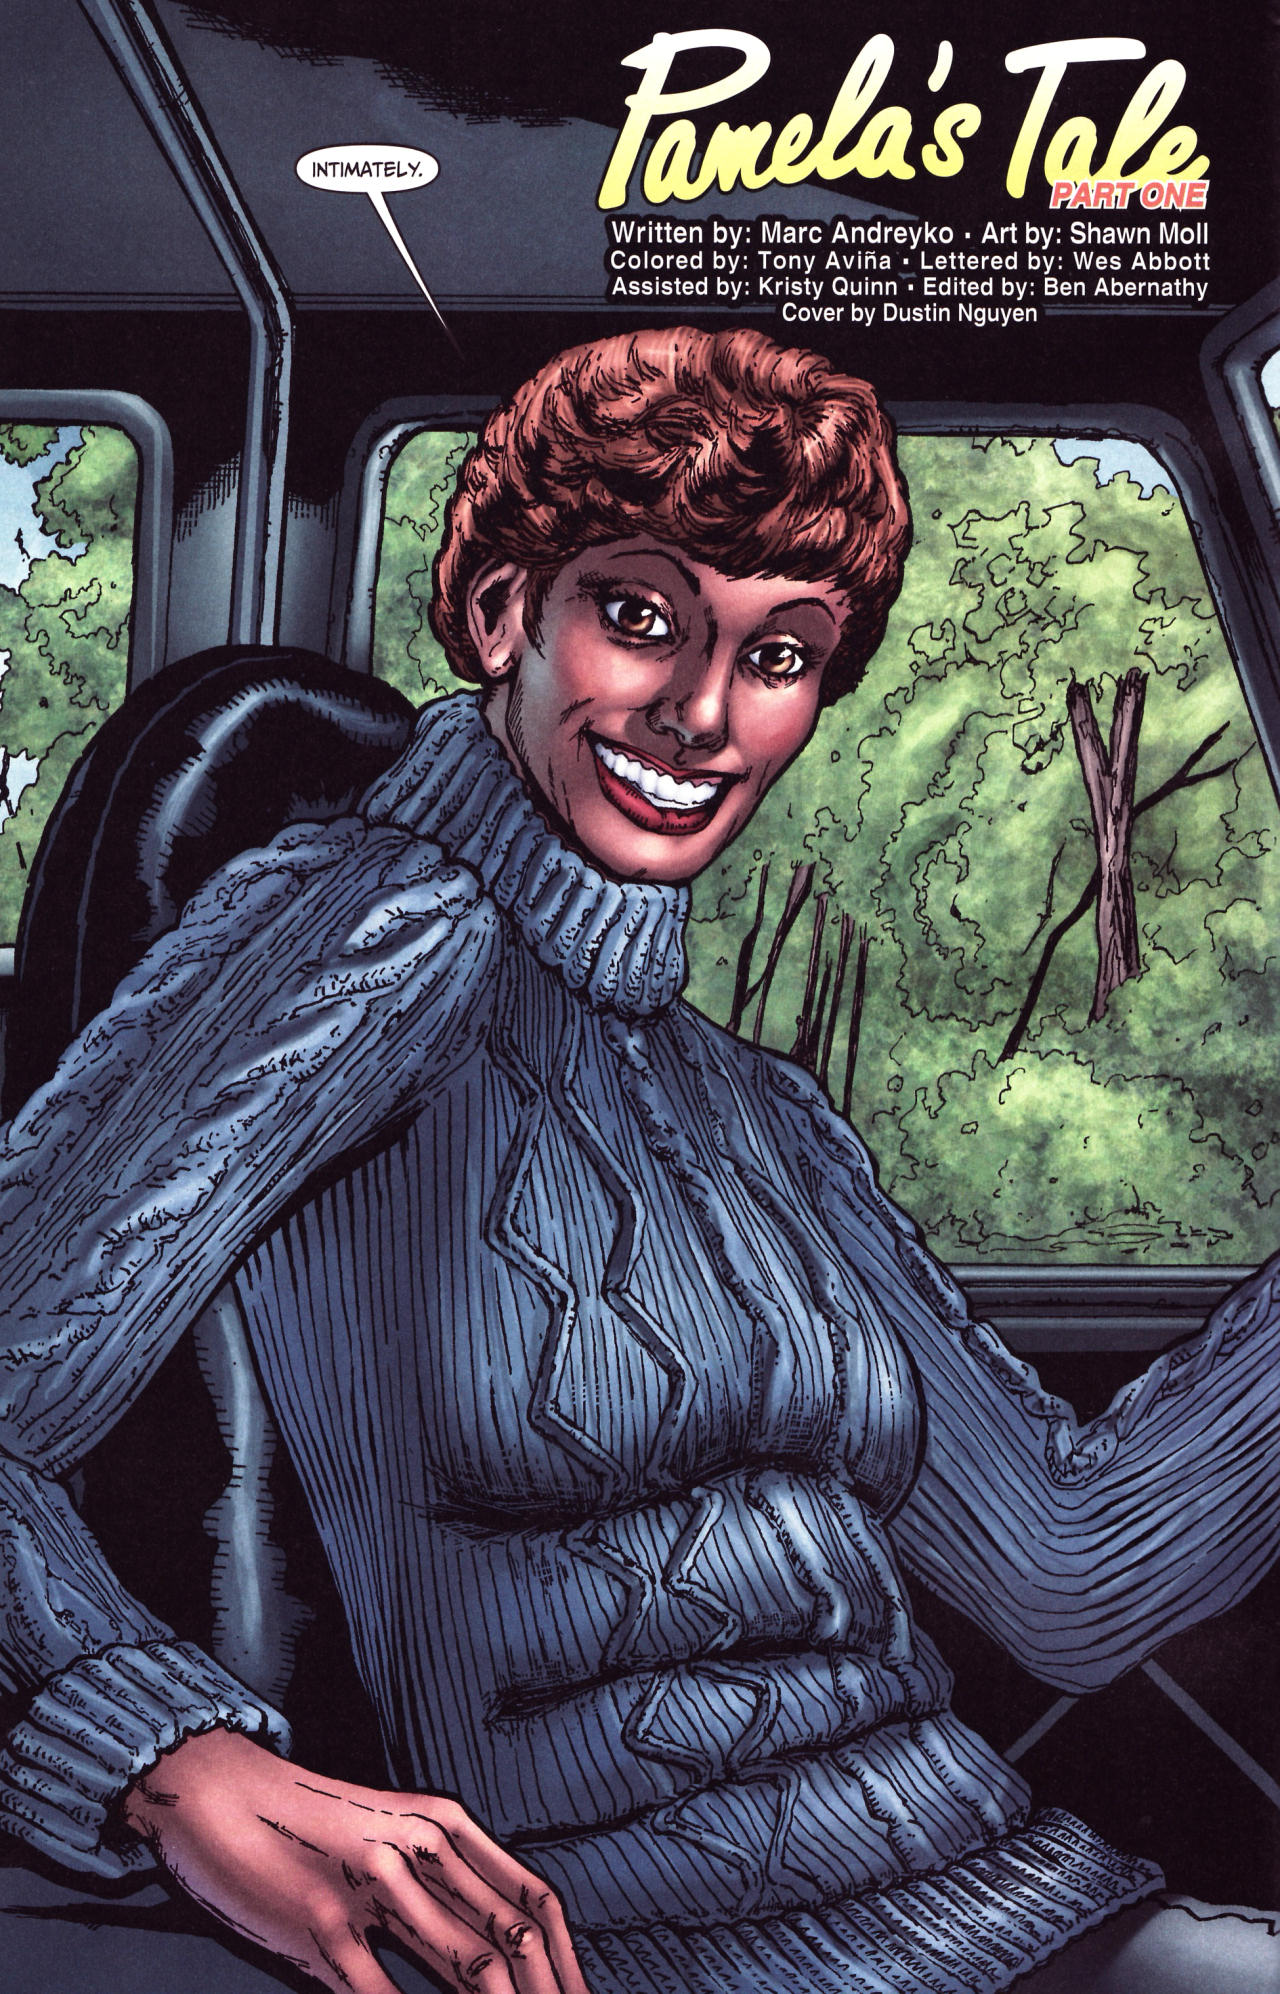 Read online Friday the 13th: Pamela's Tale comic -  Issue #1 - 6